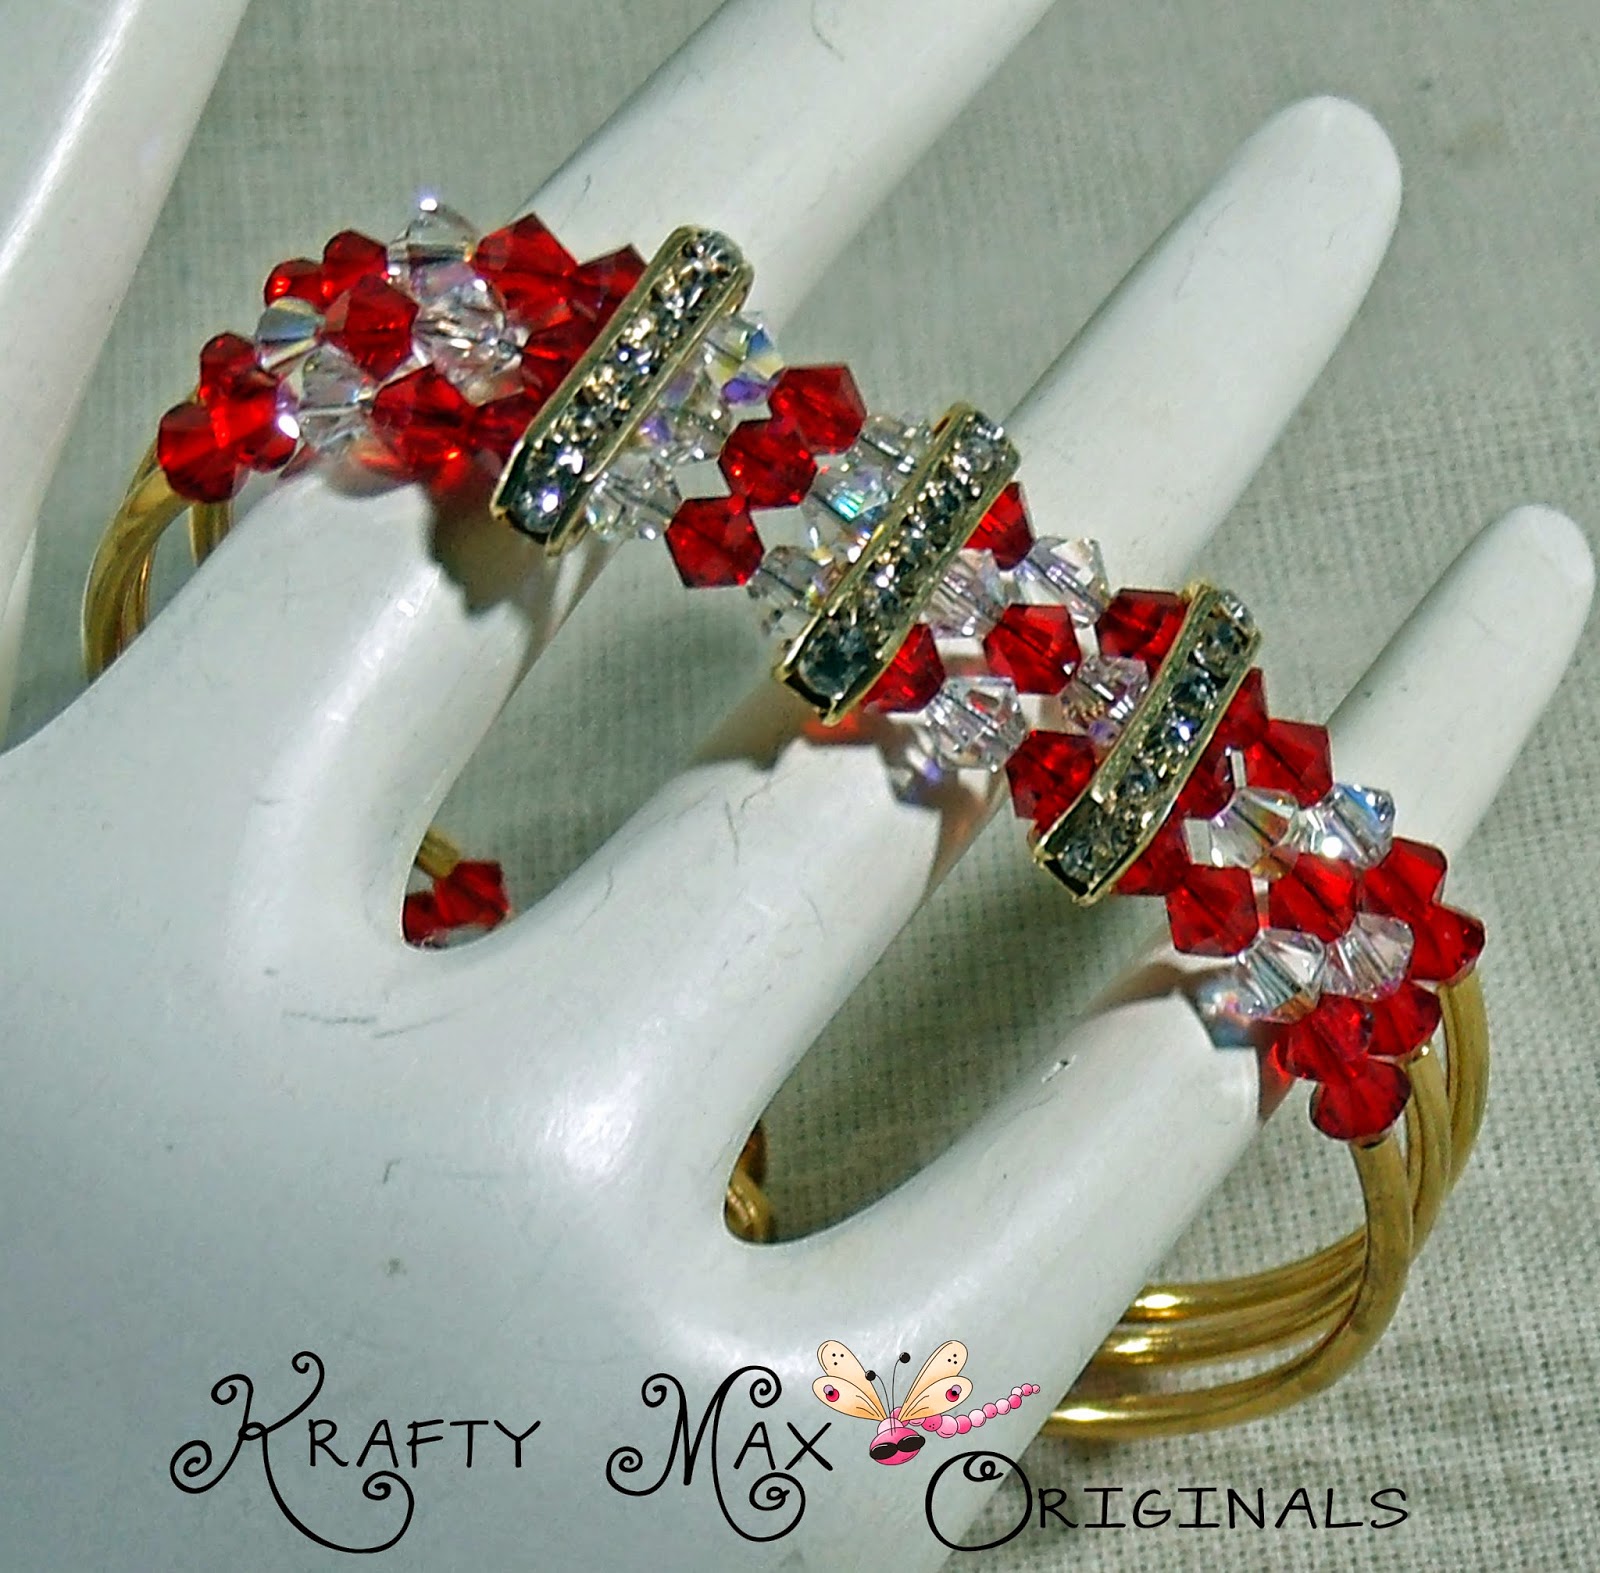 http://www.lajuliet.com/index.php/2013-01-04-15-21-51/ad/beaded,49/exclusive-red-and-clear-swarovski-crystal-and-gold-plated-triple-strand-bracelet-a-krafty-max-original-design,344